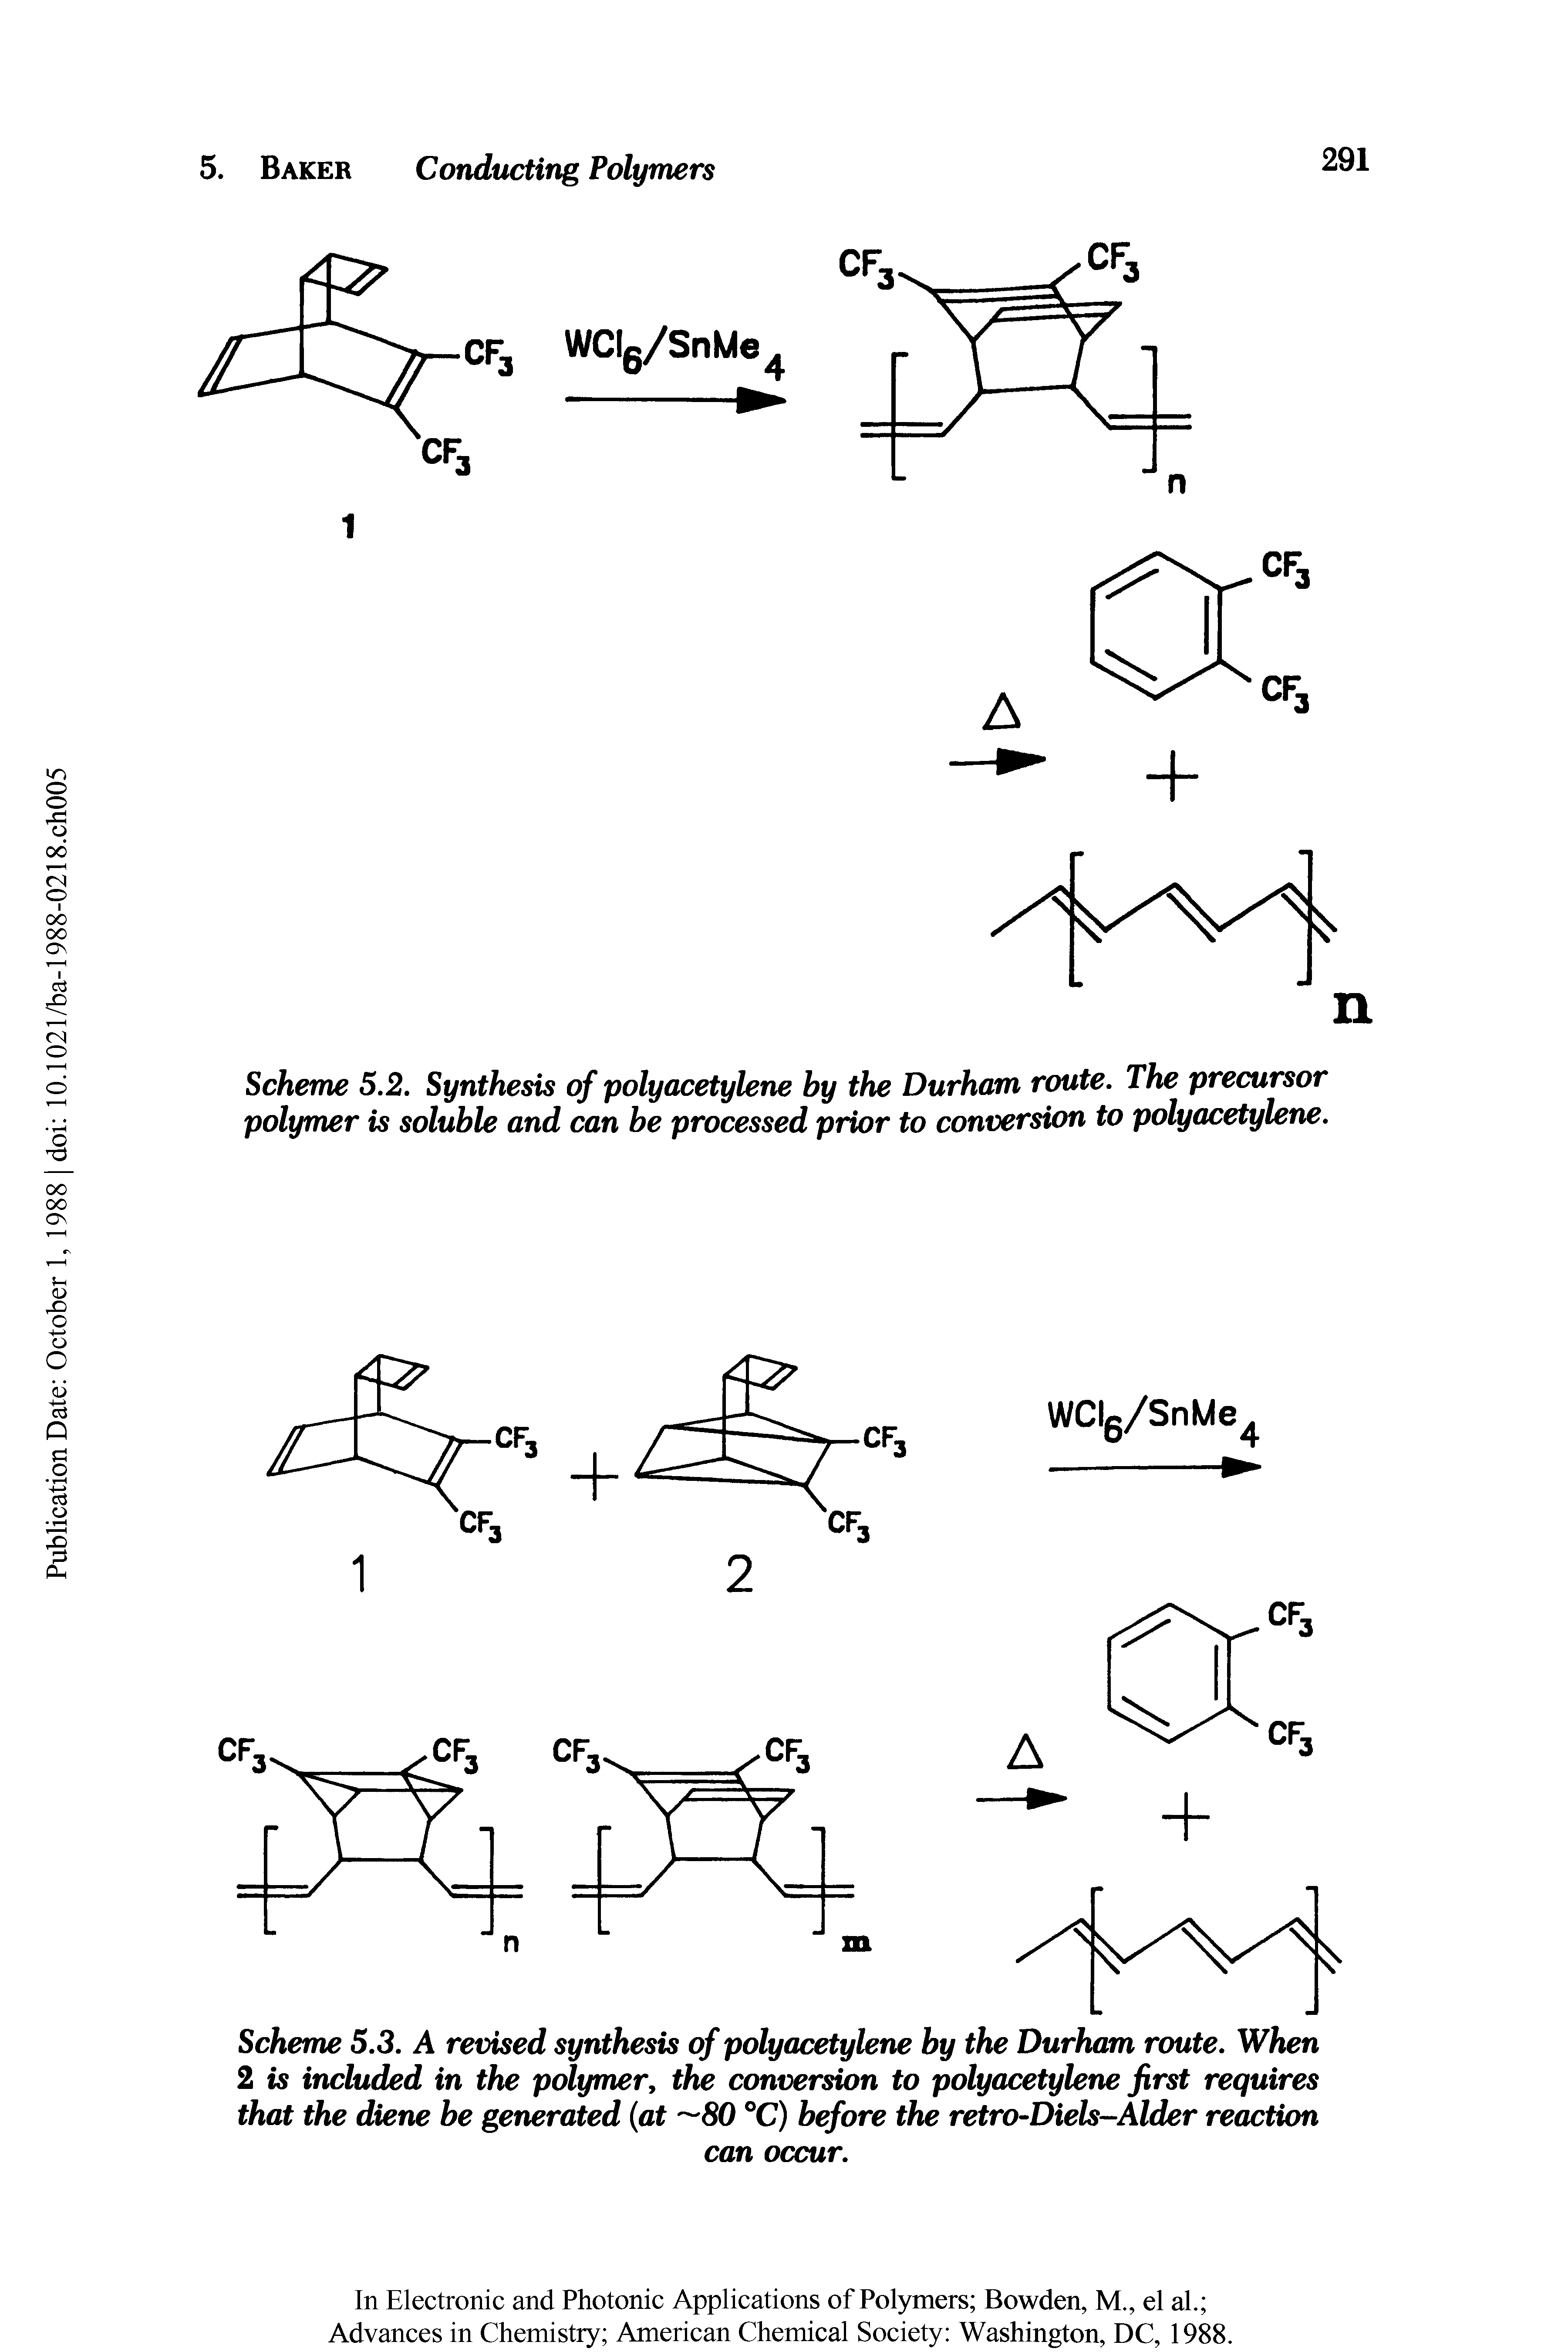 Scheme 5.2. Synthesis of polyacetylene by the Durham route. The precursor polymer is soluble and can be processed prior to conversion to poly acetylene.